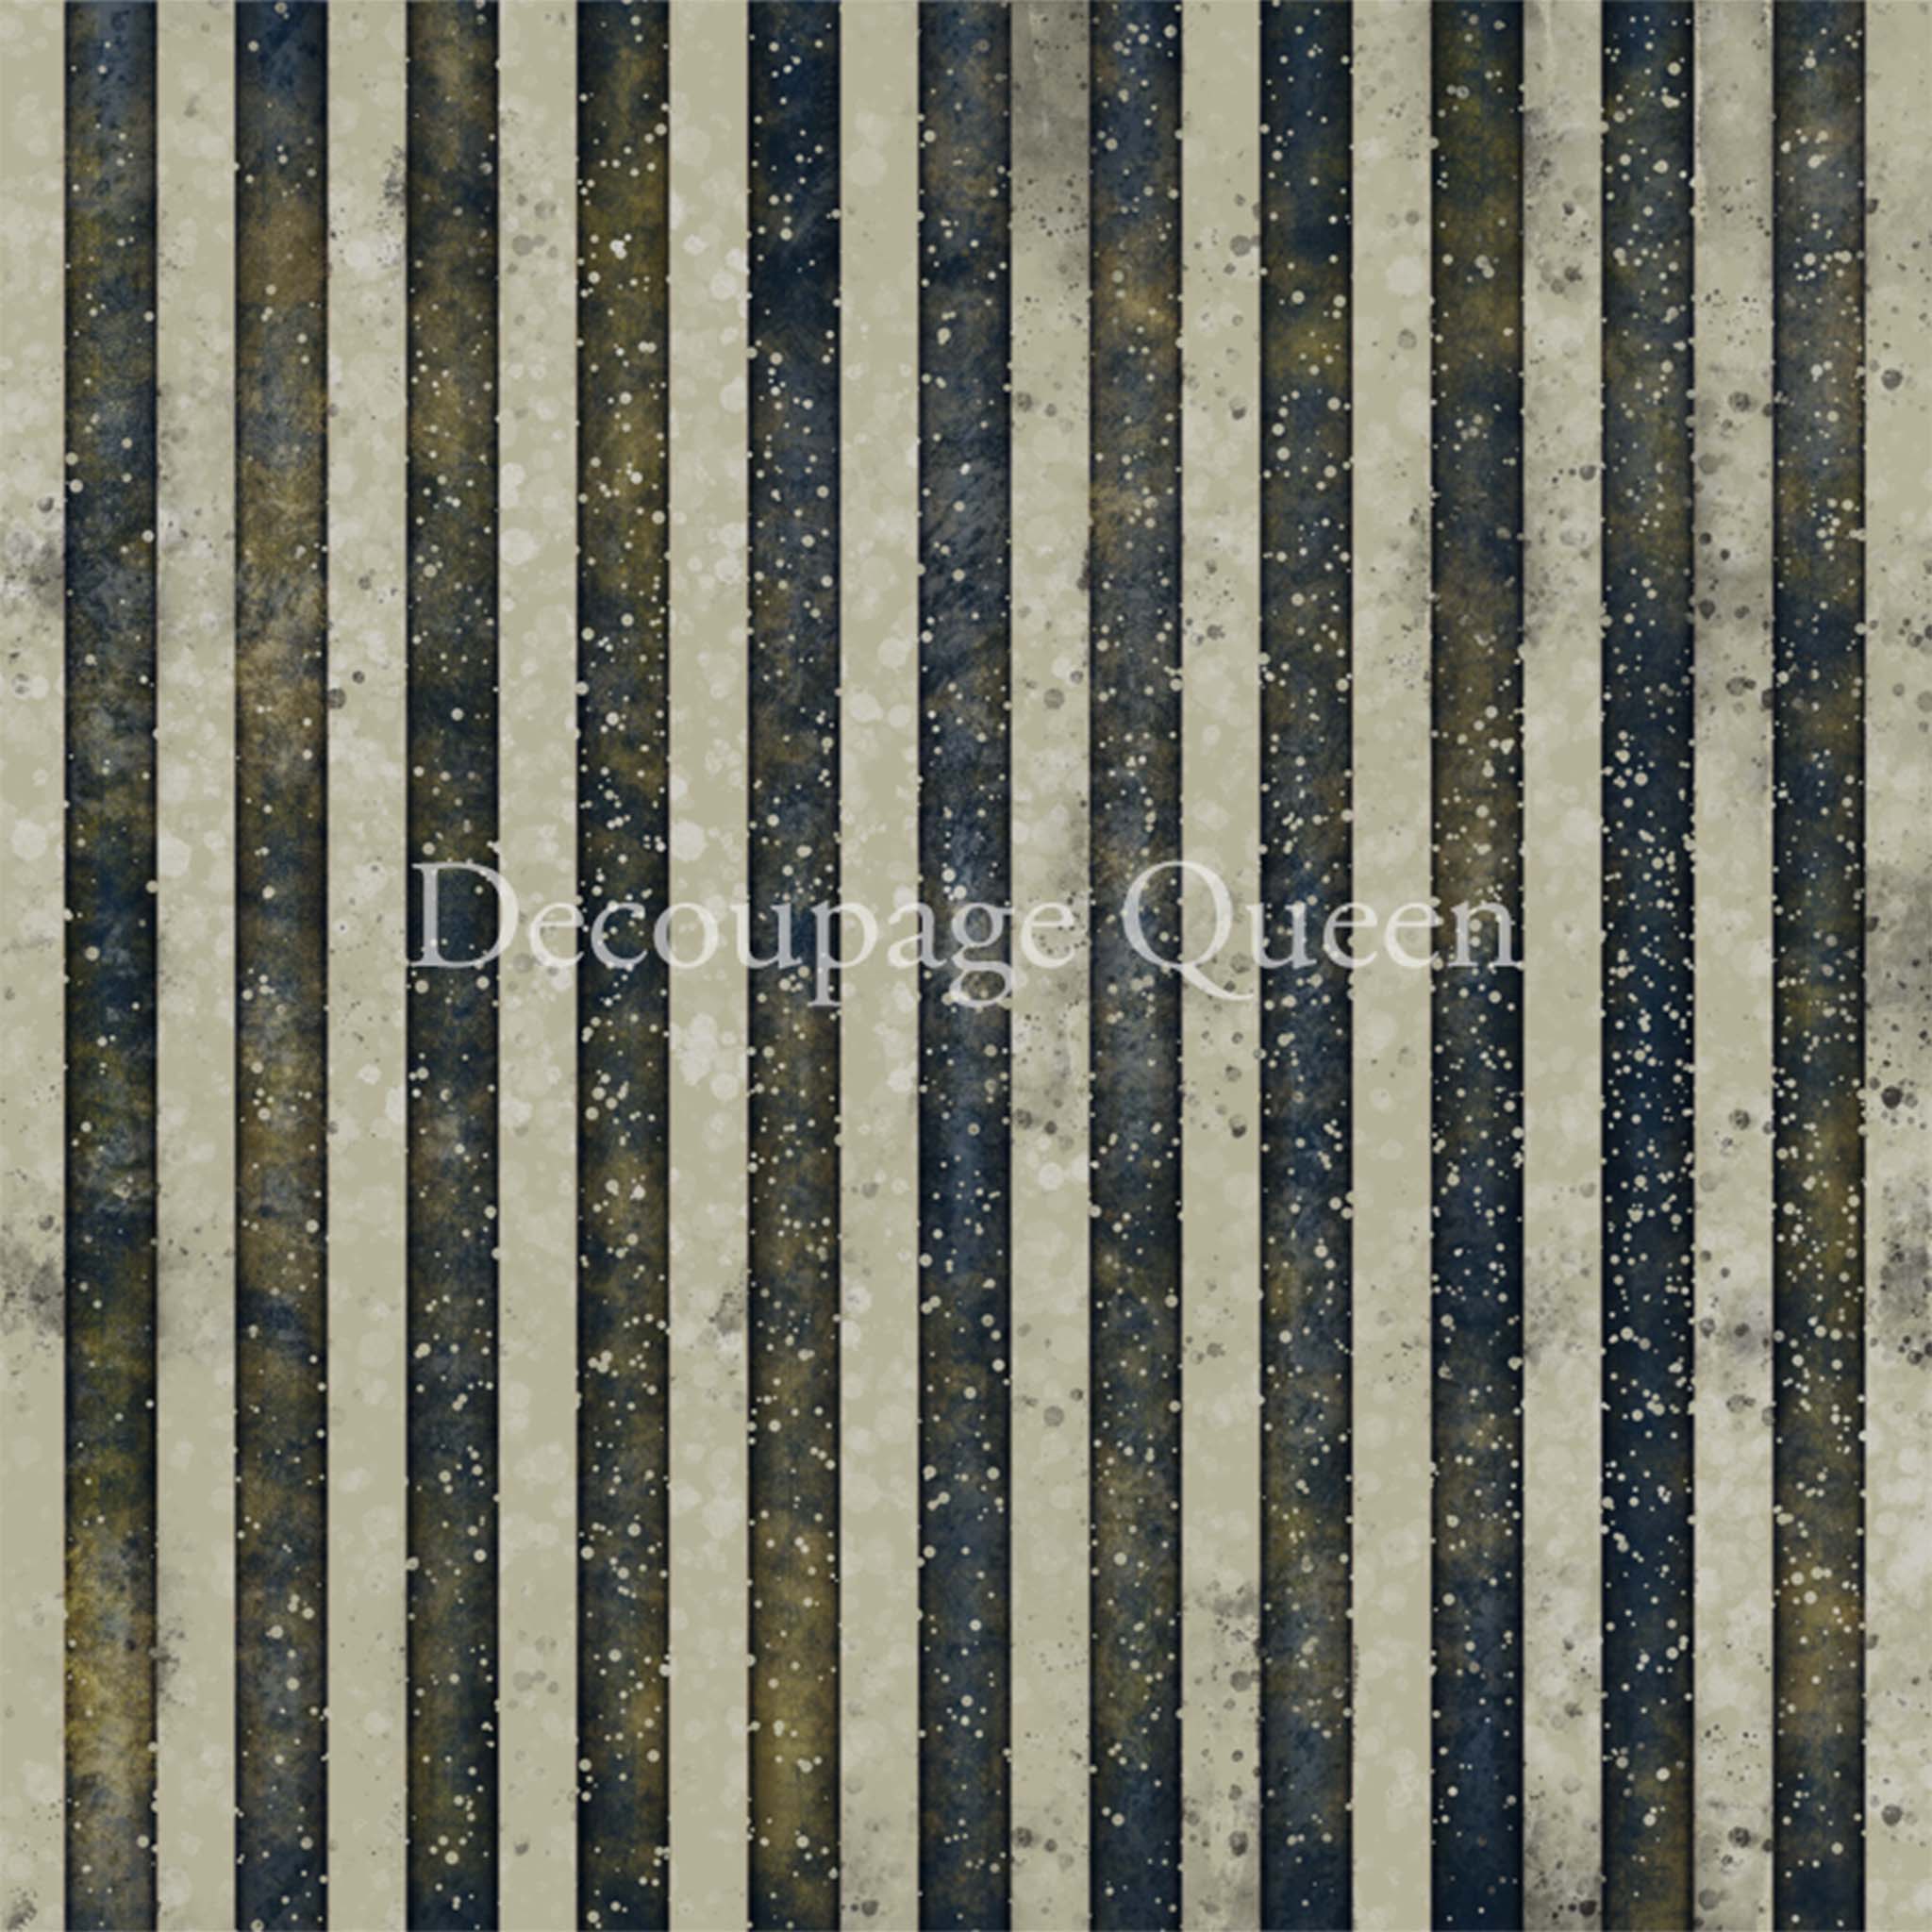 Close-up of a rice paper design that features distressed stripe print in shades of blue, gray, and olive green.